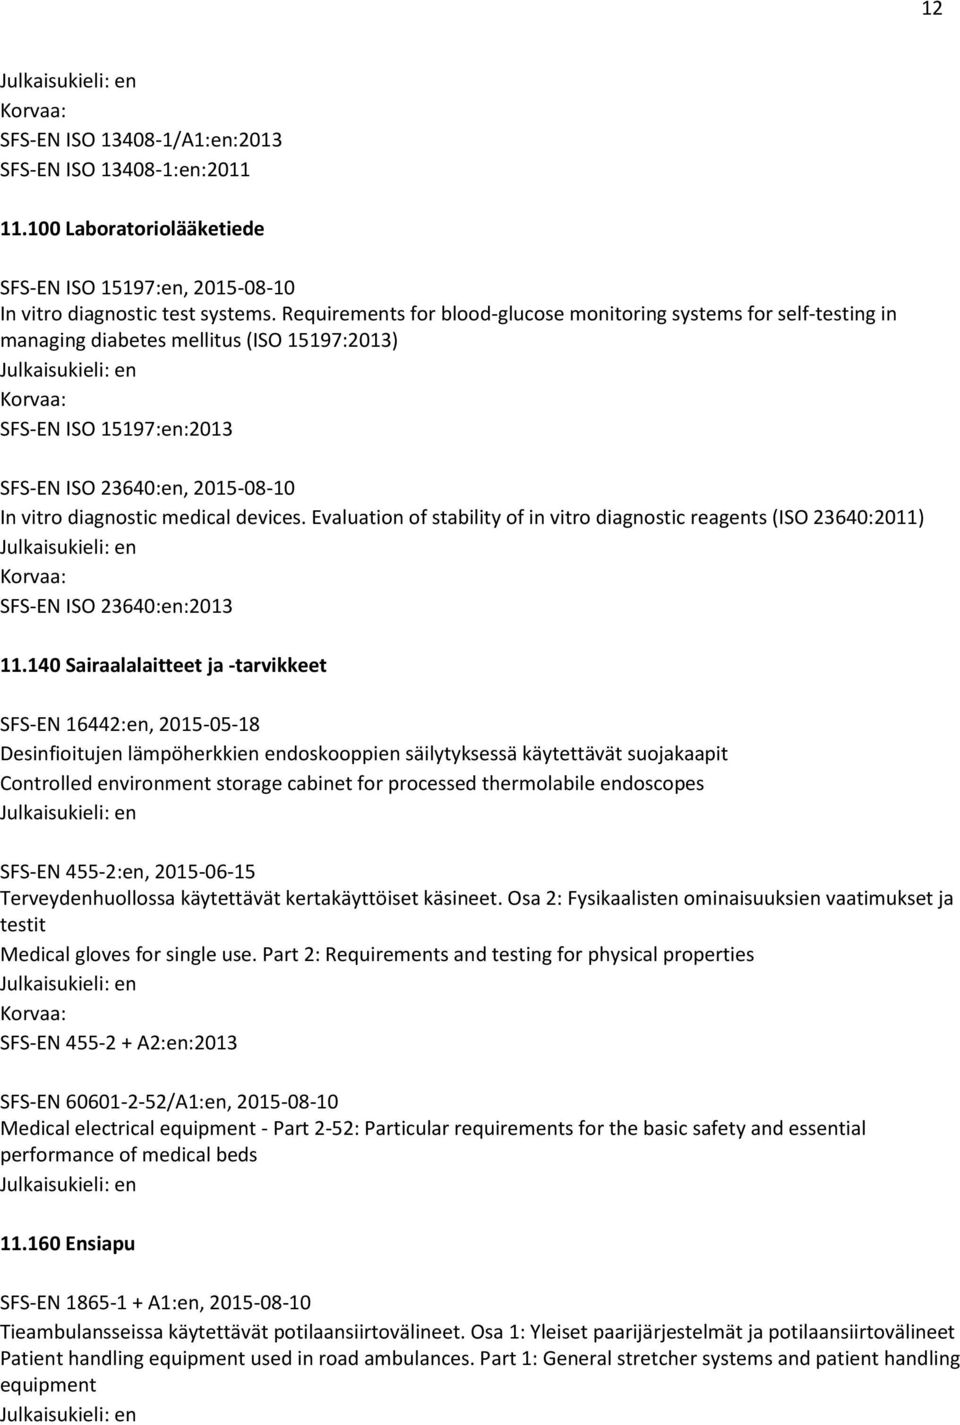 devices. Evaluation of stability of in vitro diagnostic reagents (ISO 23640:2011) SFS-EN ISO 23640:en:2013 11.